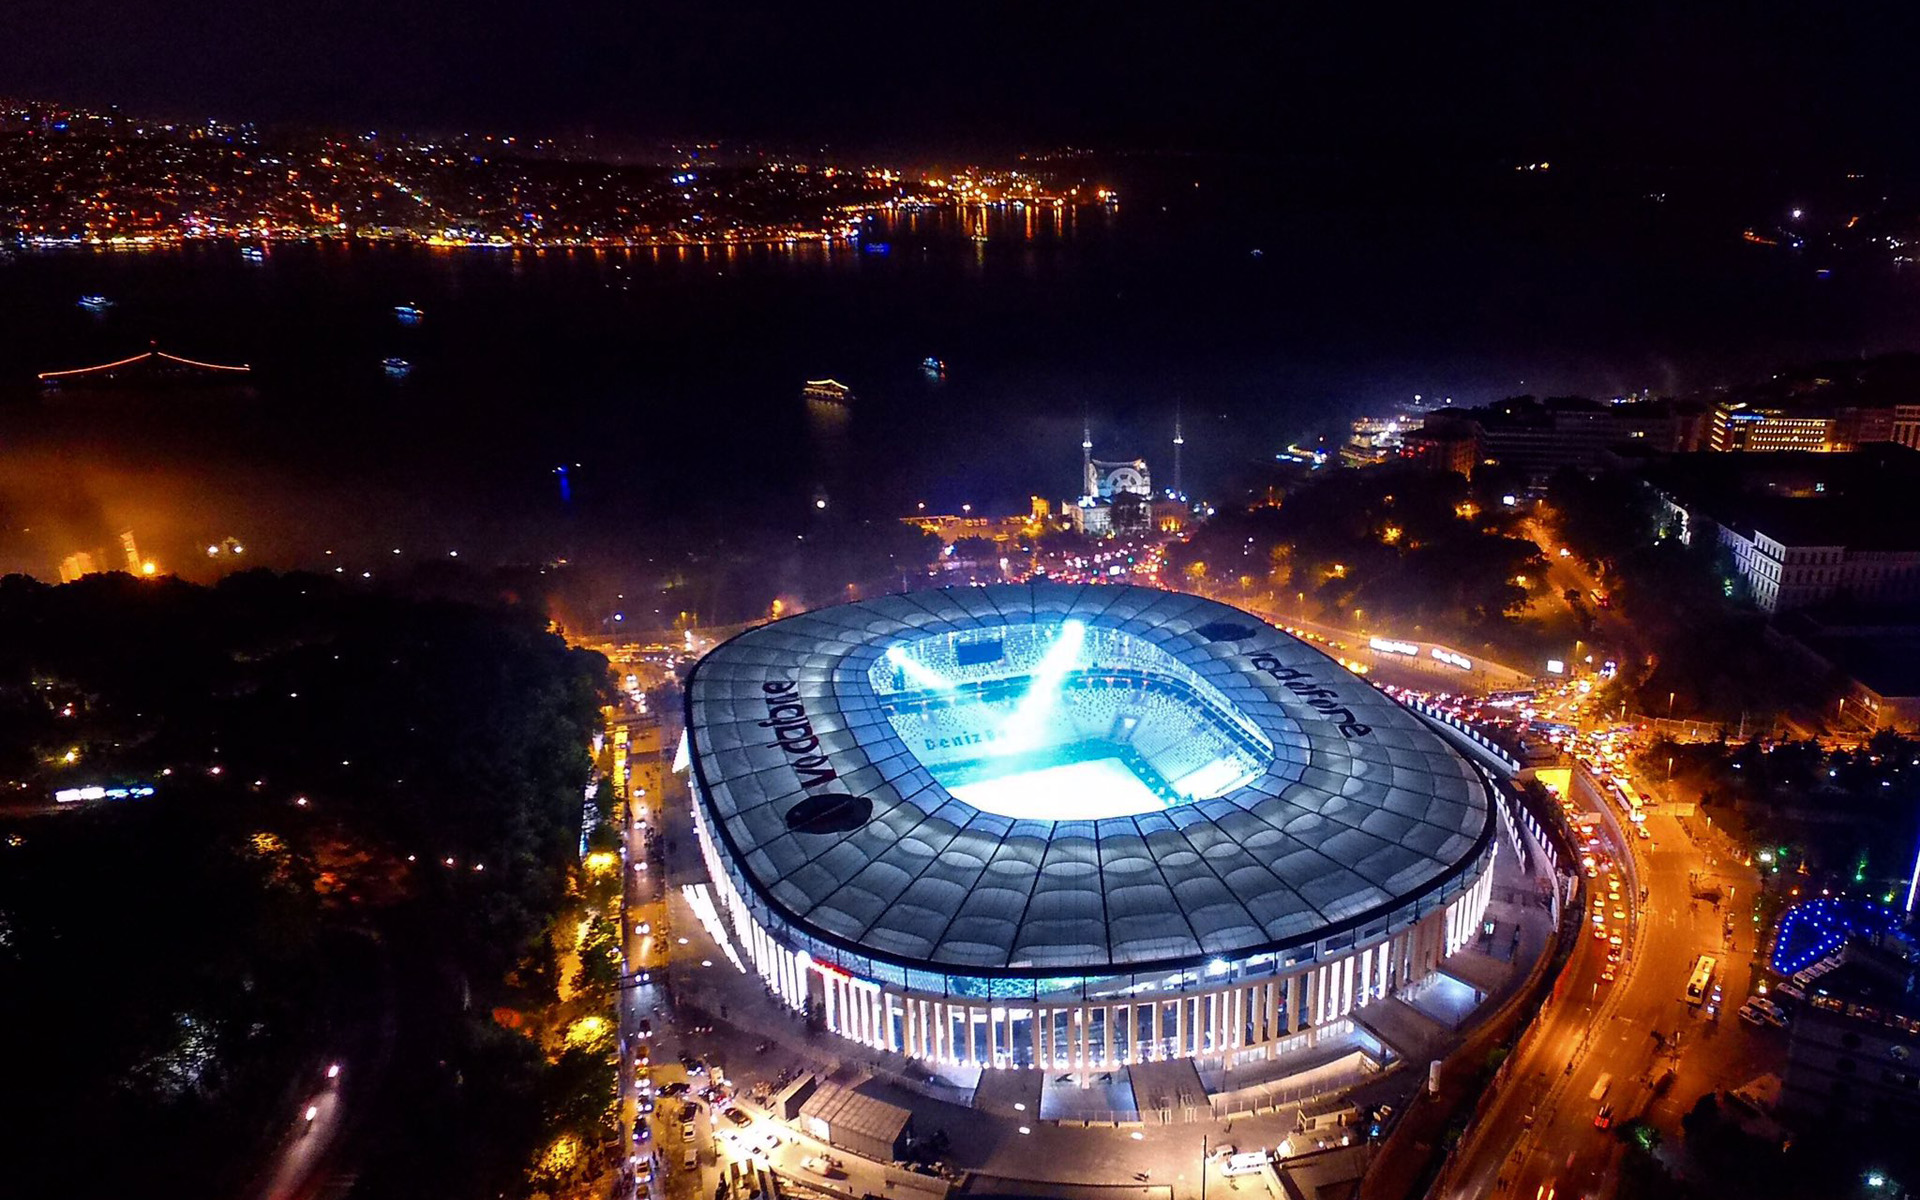 Download wallpaper Vodafone Park, night, aerial view, football stadium, BJK, Vodafone Arena, soccer, Besiktas stadium, Turkey, turkish stadium, Besiktas for desktop with resolution 1920x1200. High Quality HD picture wallpaper